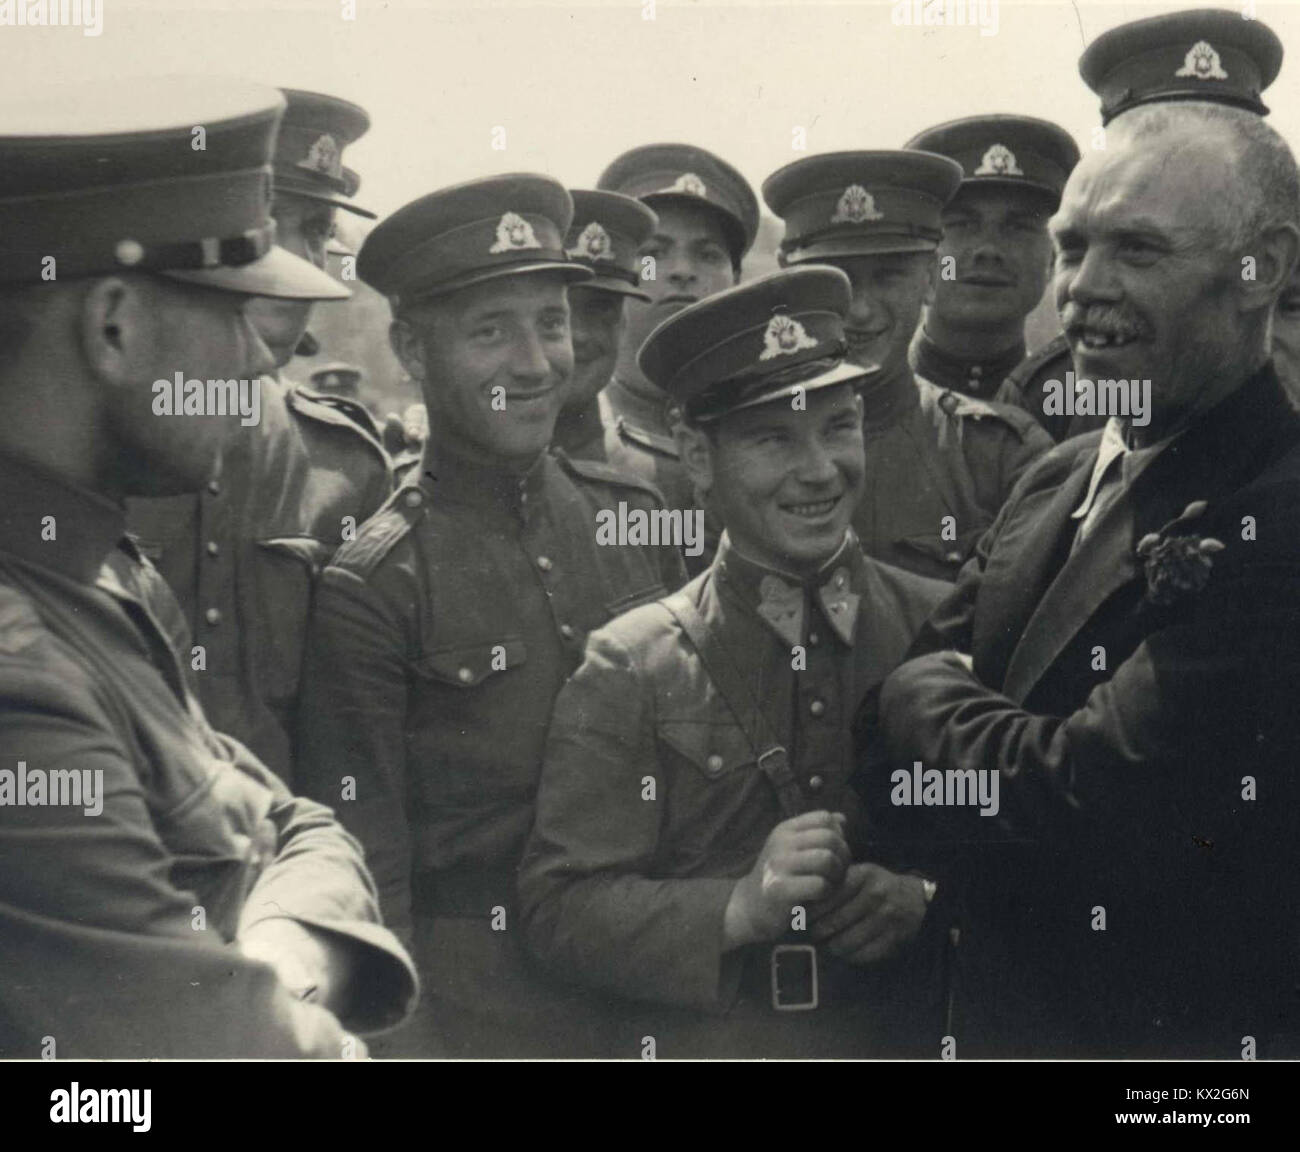 Soviet political leader (without shoulder straps) and the People's Seimas member (with red rose in his jacket lapel) announces to the Lithuanian People's Army non-commissioned officers that 'soon you will become members of the glorious Red Army' in Kaunas on July 19, 1940. Stock Photo